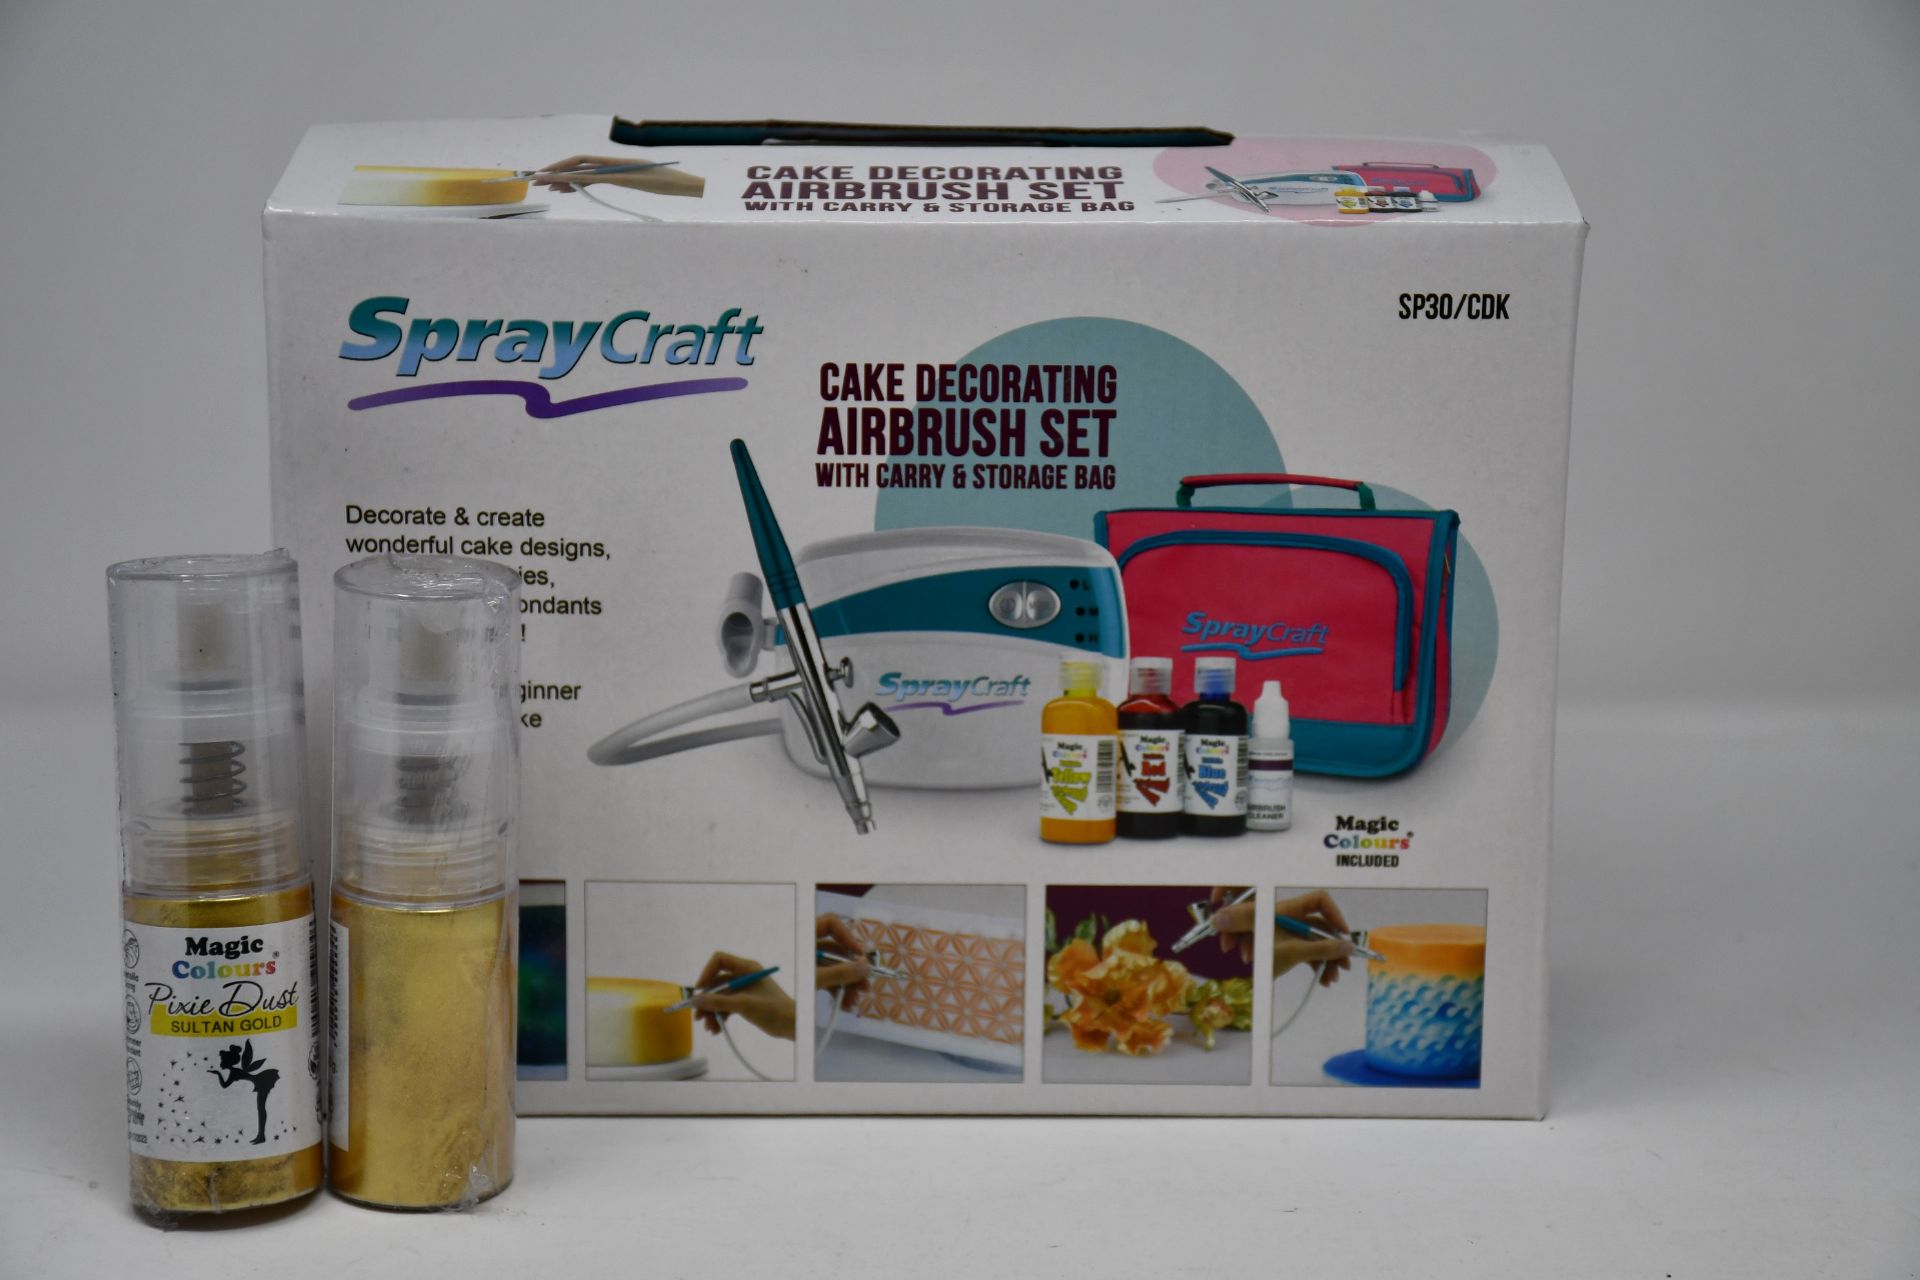 Three boxed as new Spraycraft cake decorating airbrush sets with carry and storage bag and a